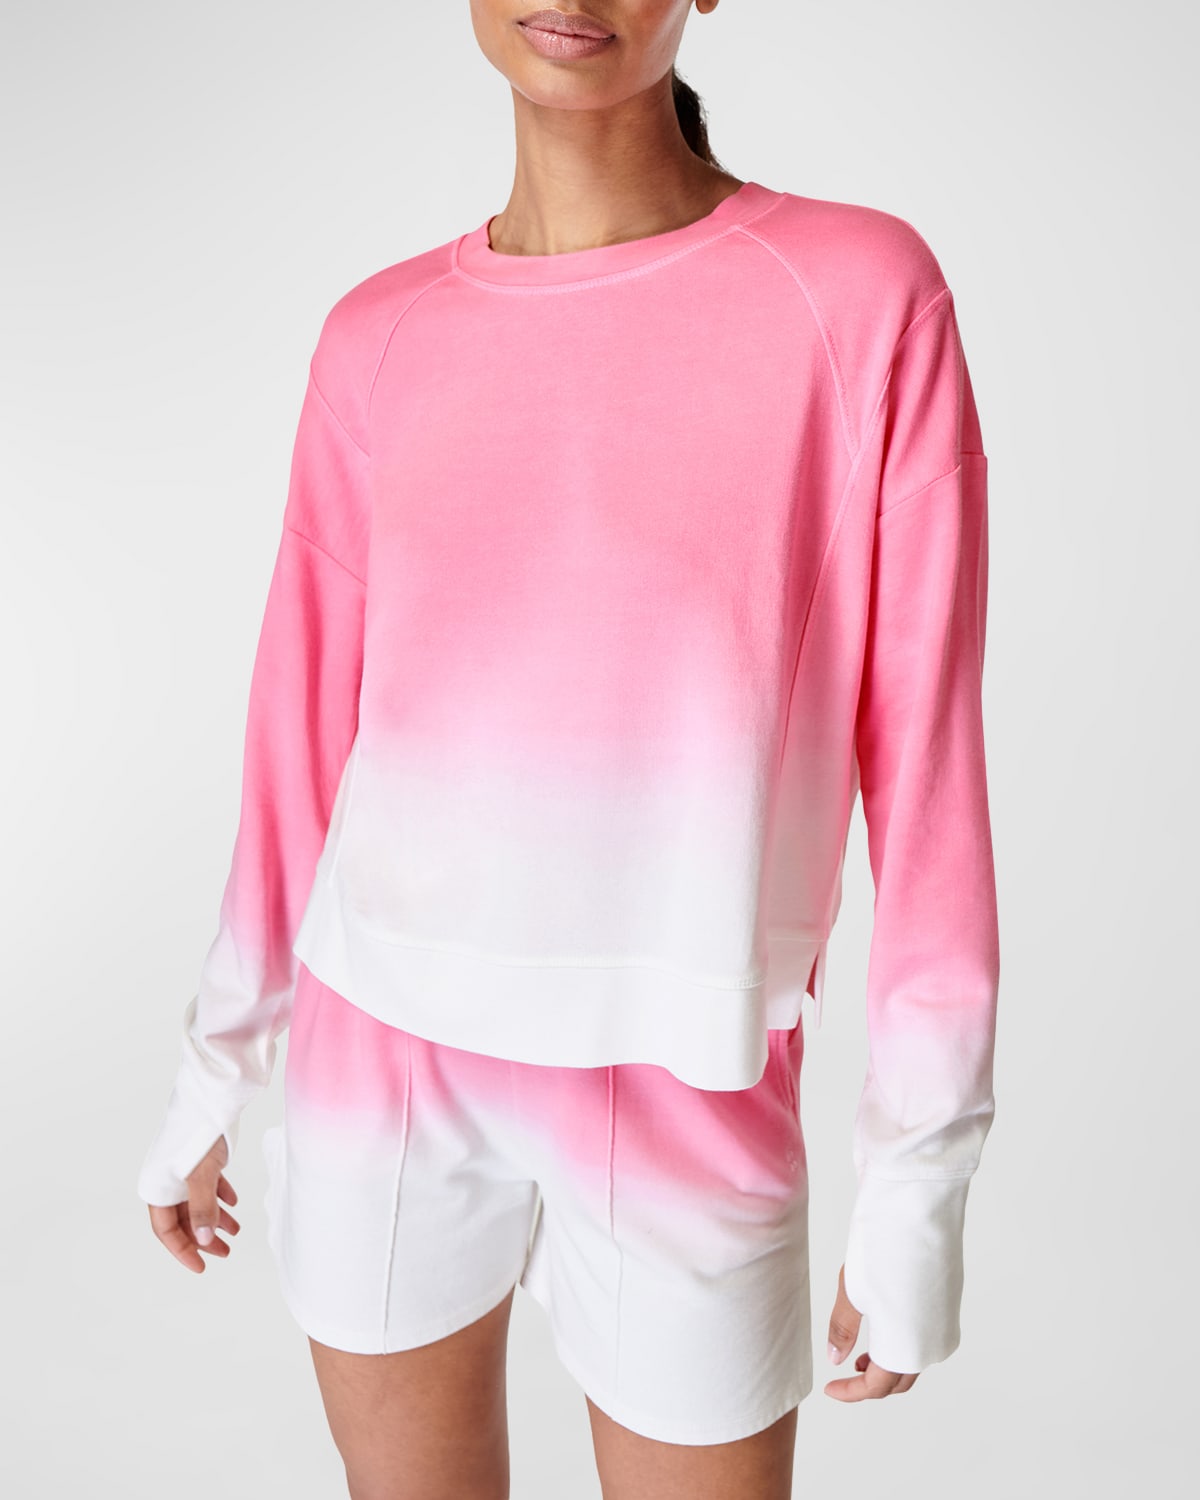 After Class Ombre Cropped Sweatshirt